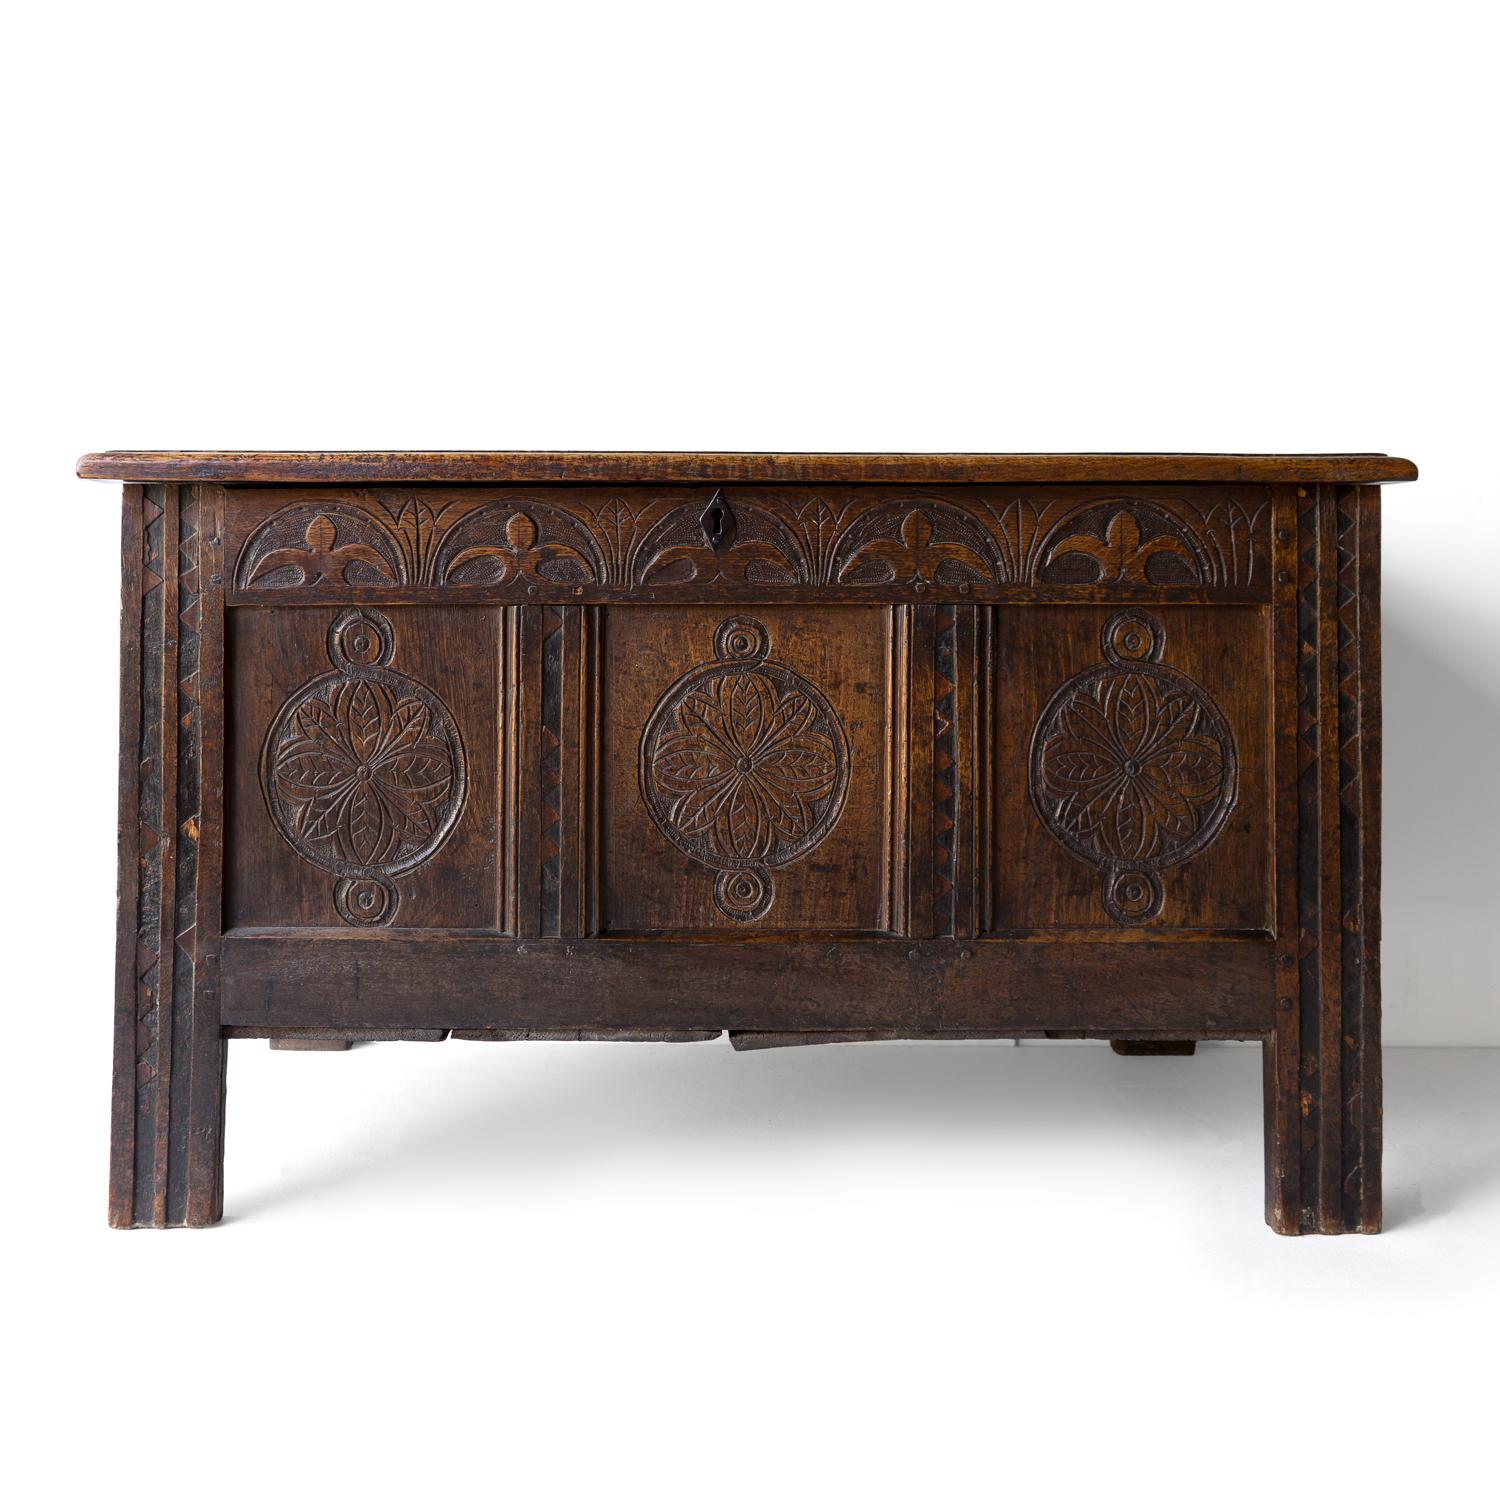 ANTIQUE PRIMITIVE OAK COFFER
A country-made piece with charming folk art style carving depicting stylised flowers, fans and geometric patterns.

Originating from the West Country, England.

Made from solid oak with a wonderful rich patina naturally